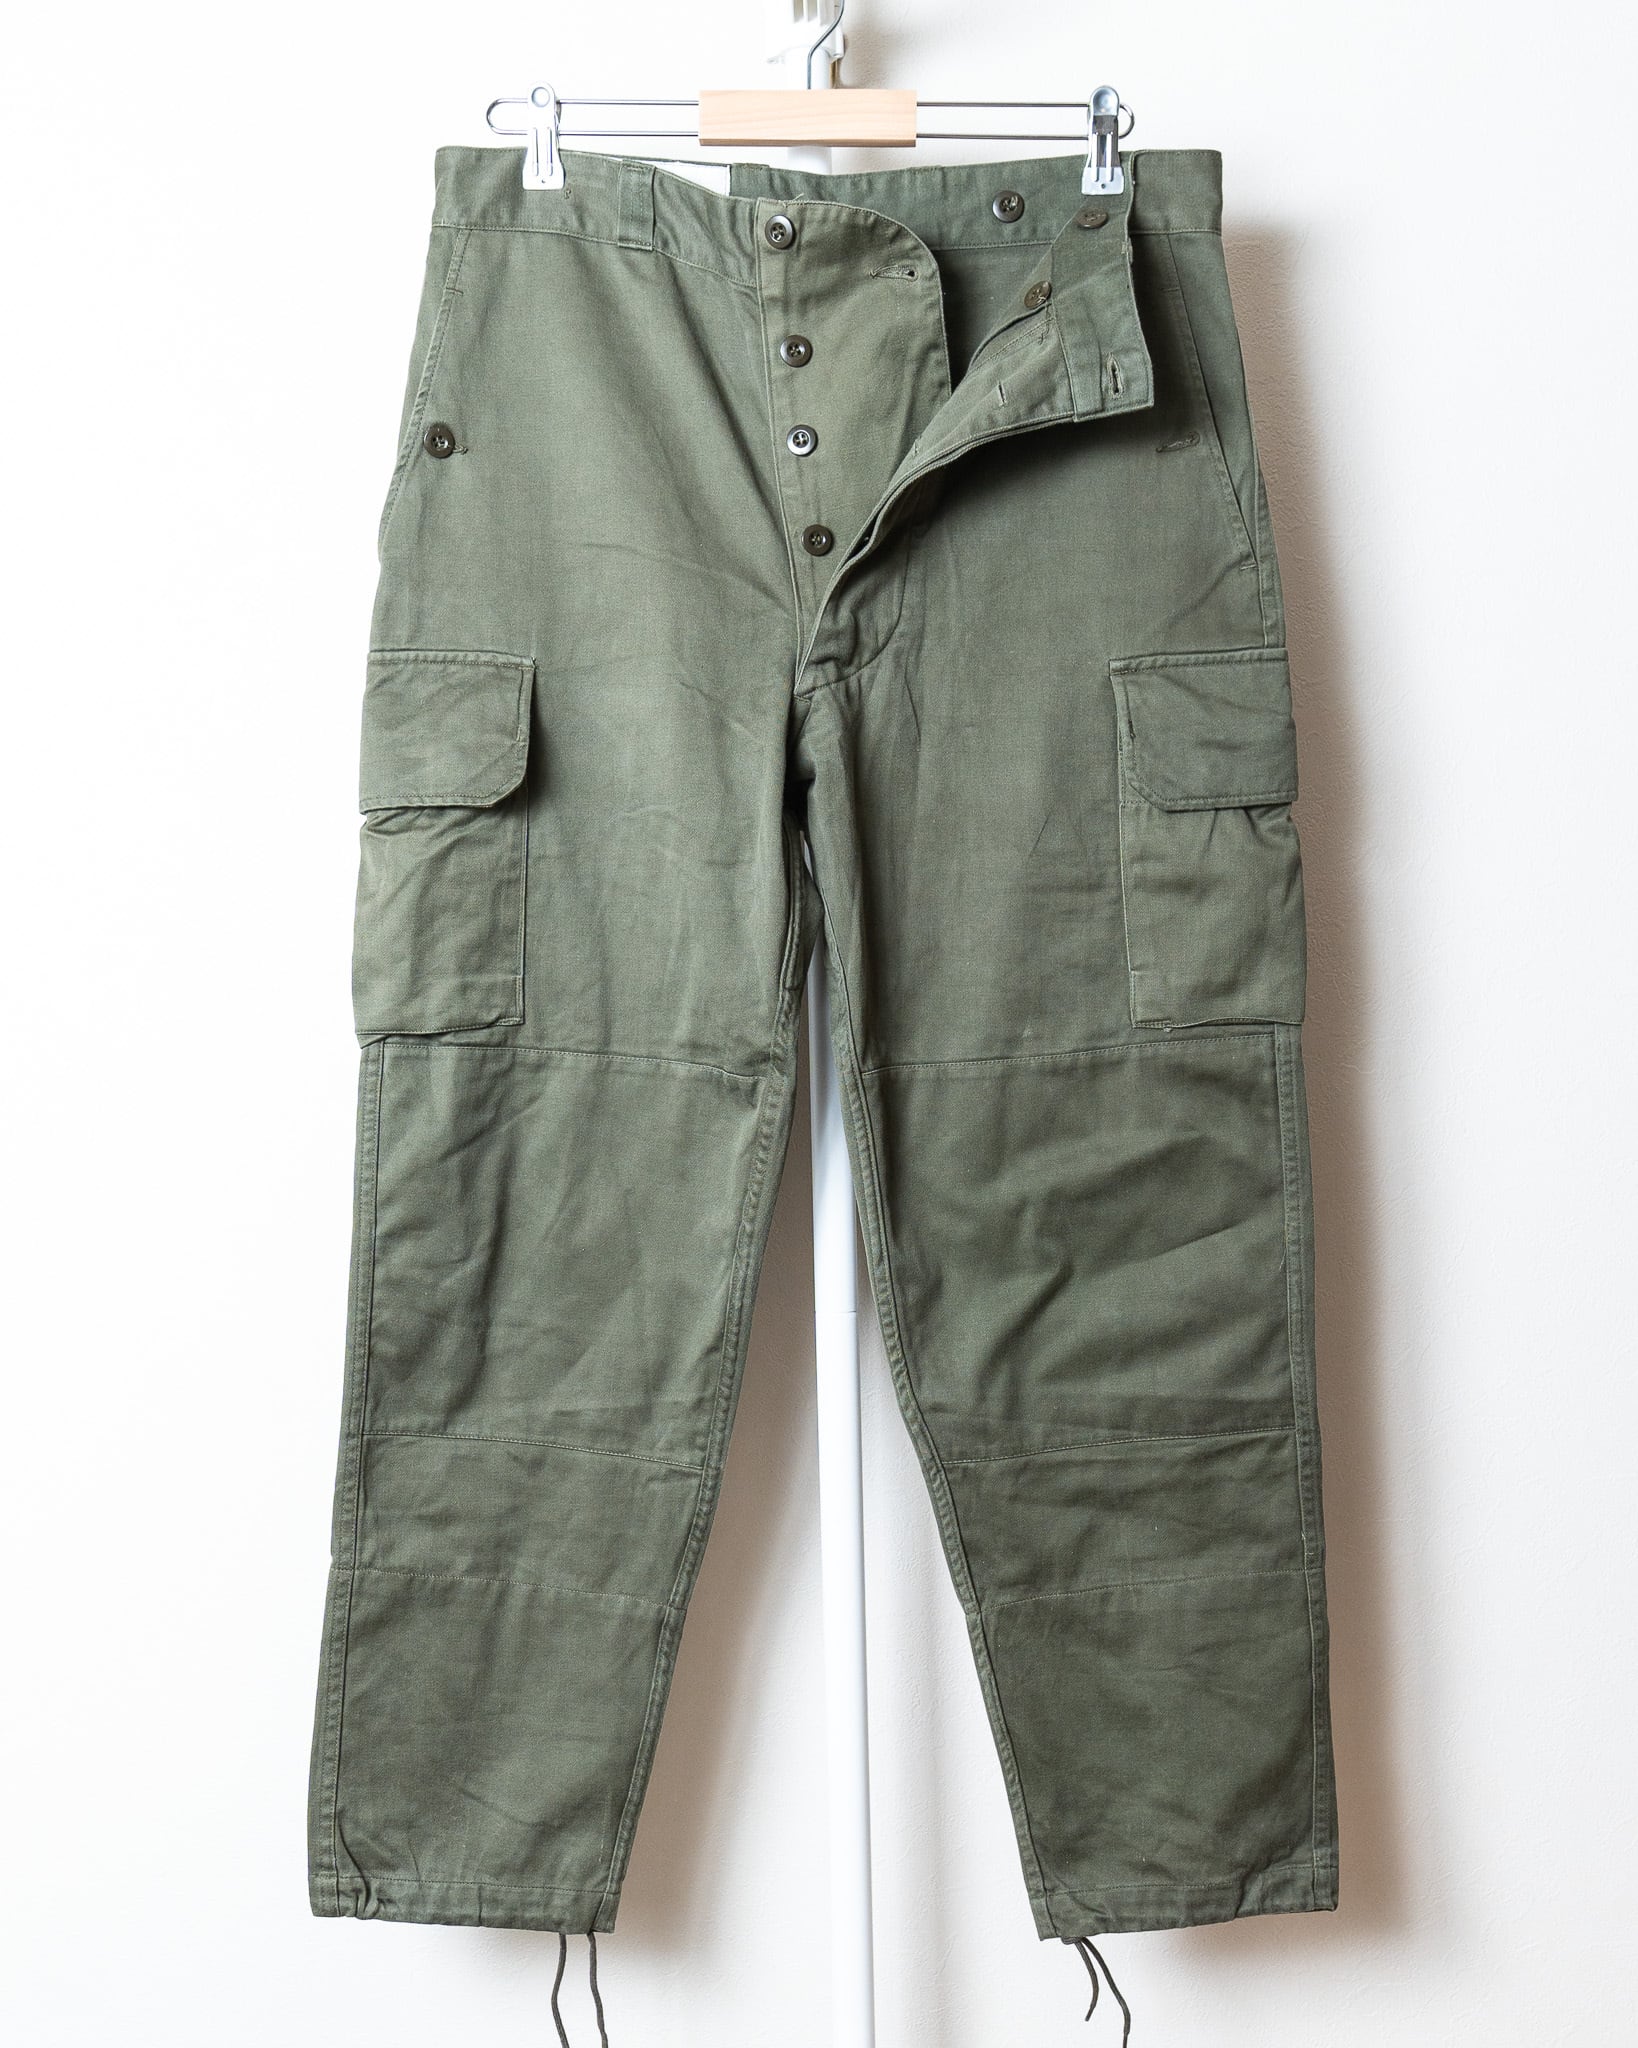 AランクUsed】French Army M-64 Field Trousers フランス軍 実物 M64 ...